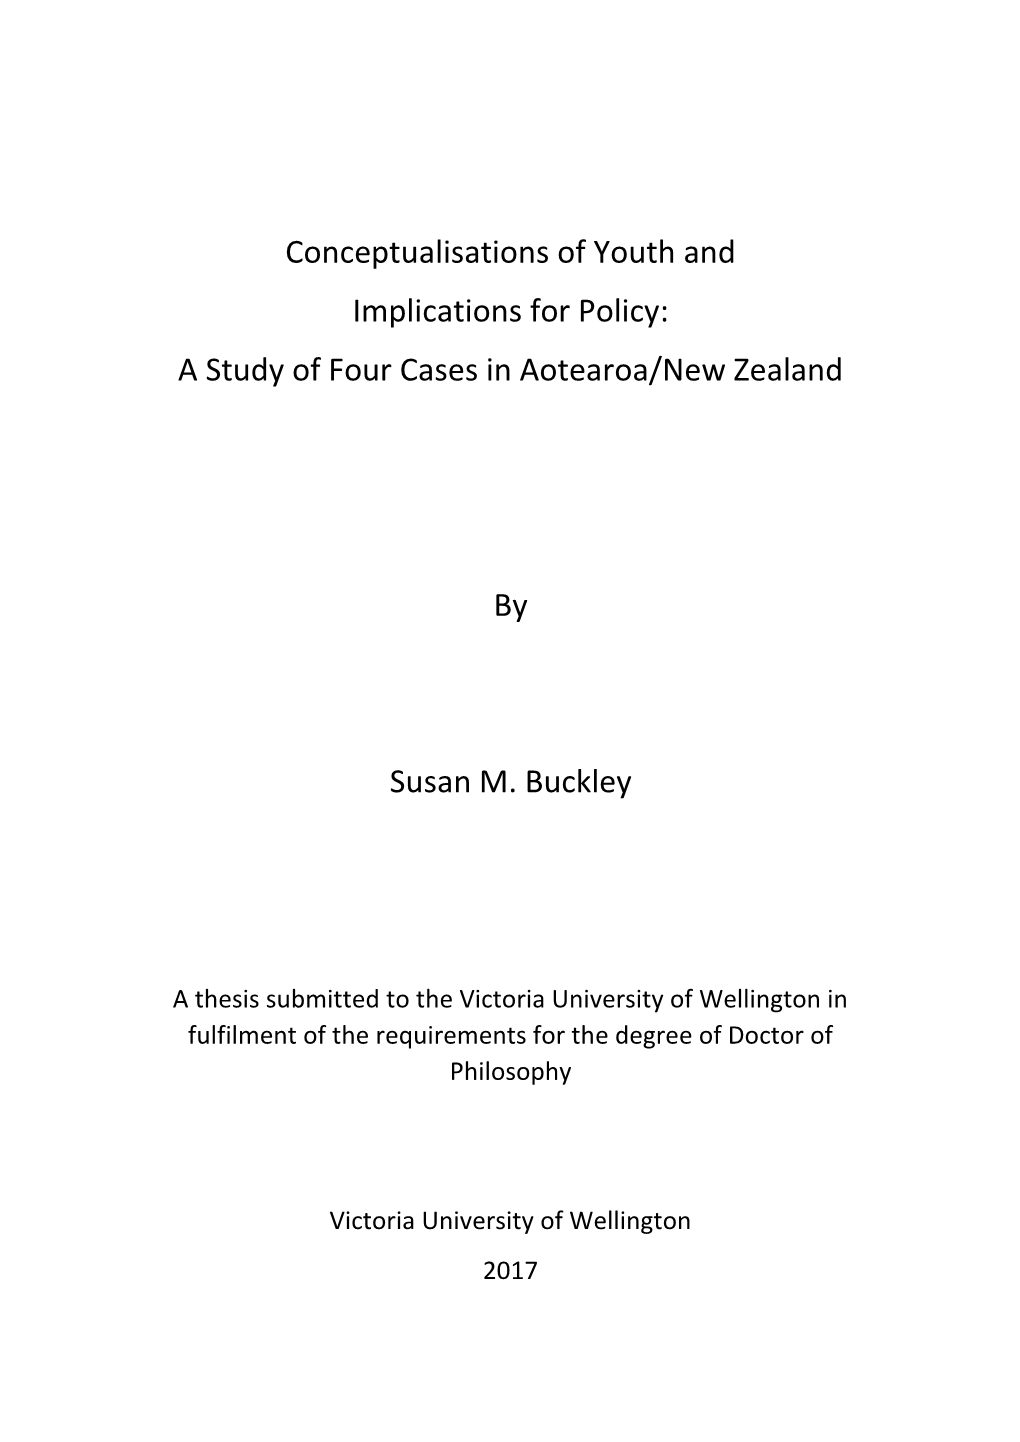 Conceptualisations of Youth and Implications for Policy: a Study of Four Cases in Aotearoa/New Zealand